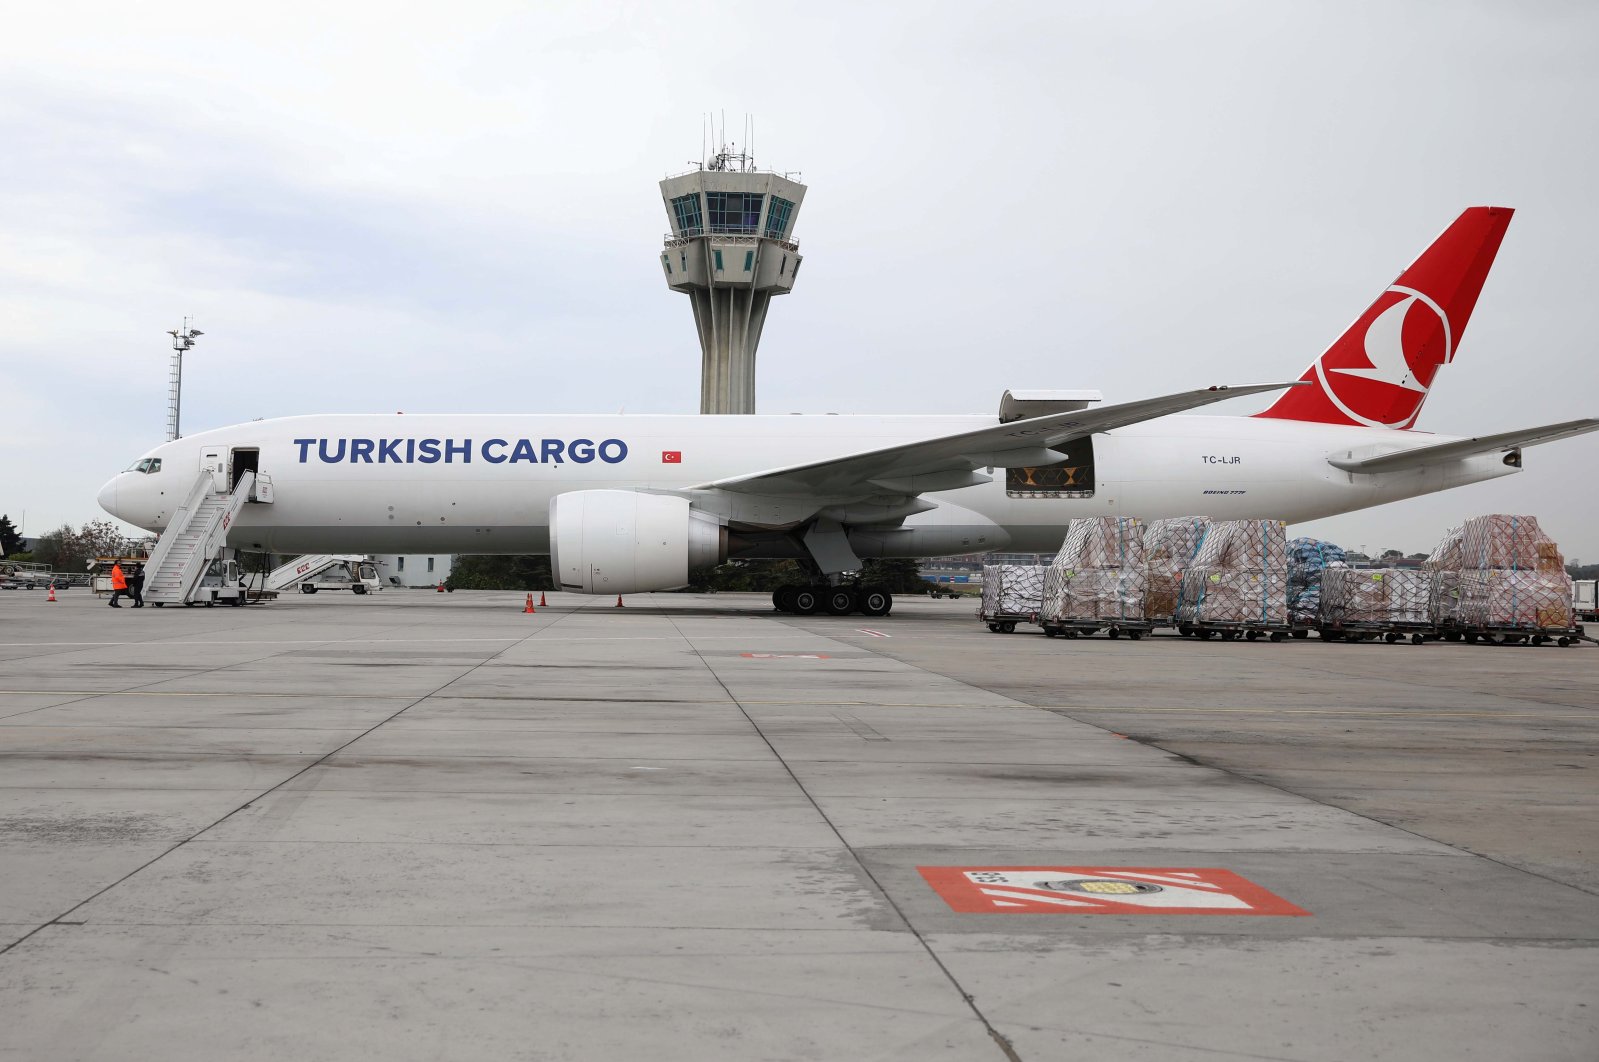 A Turkish Cargo plane is pictured on the tarmac of Atatürk Airport, Istanbul, Turkey, Nov. 18, 2020. (Reuters Photo)